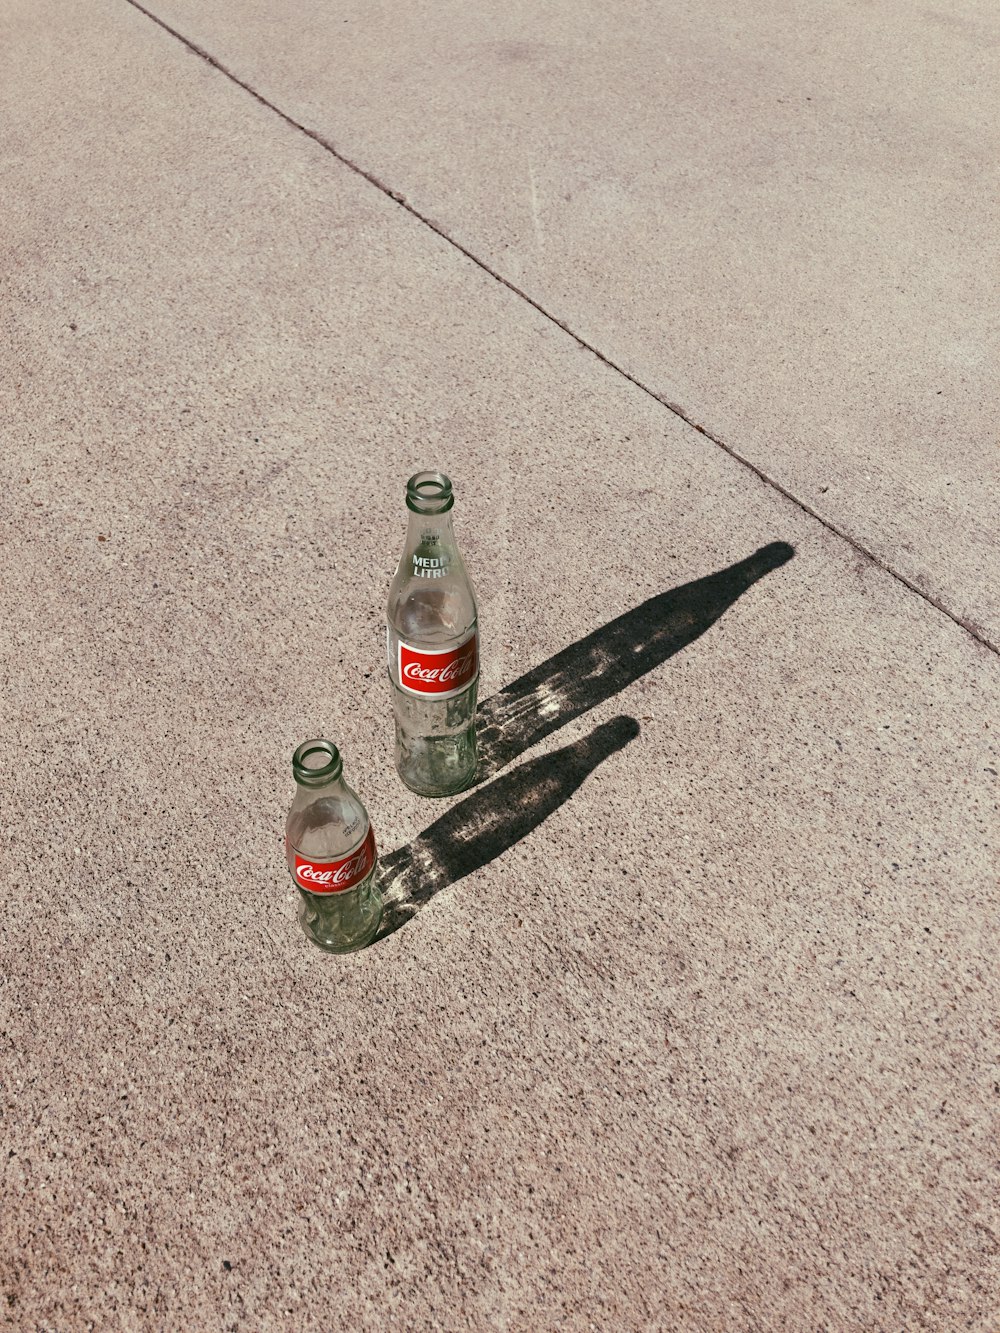 two empty glass bottles on pavement